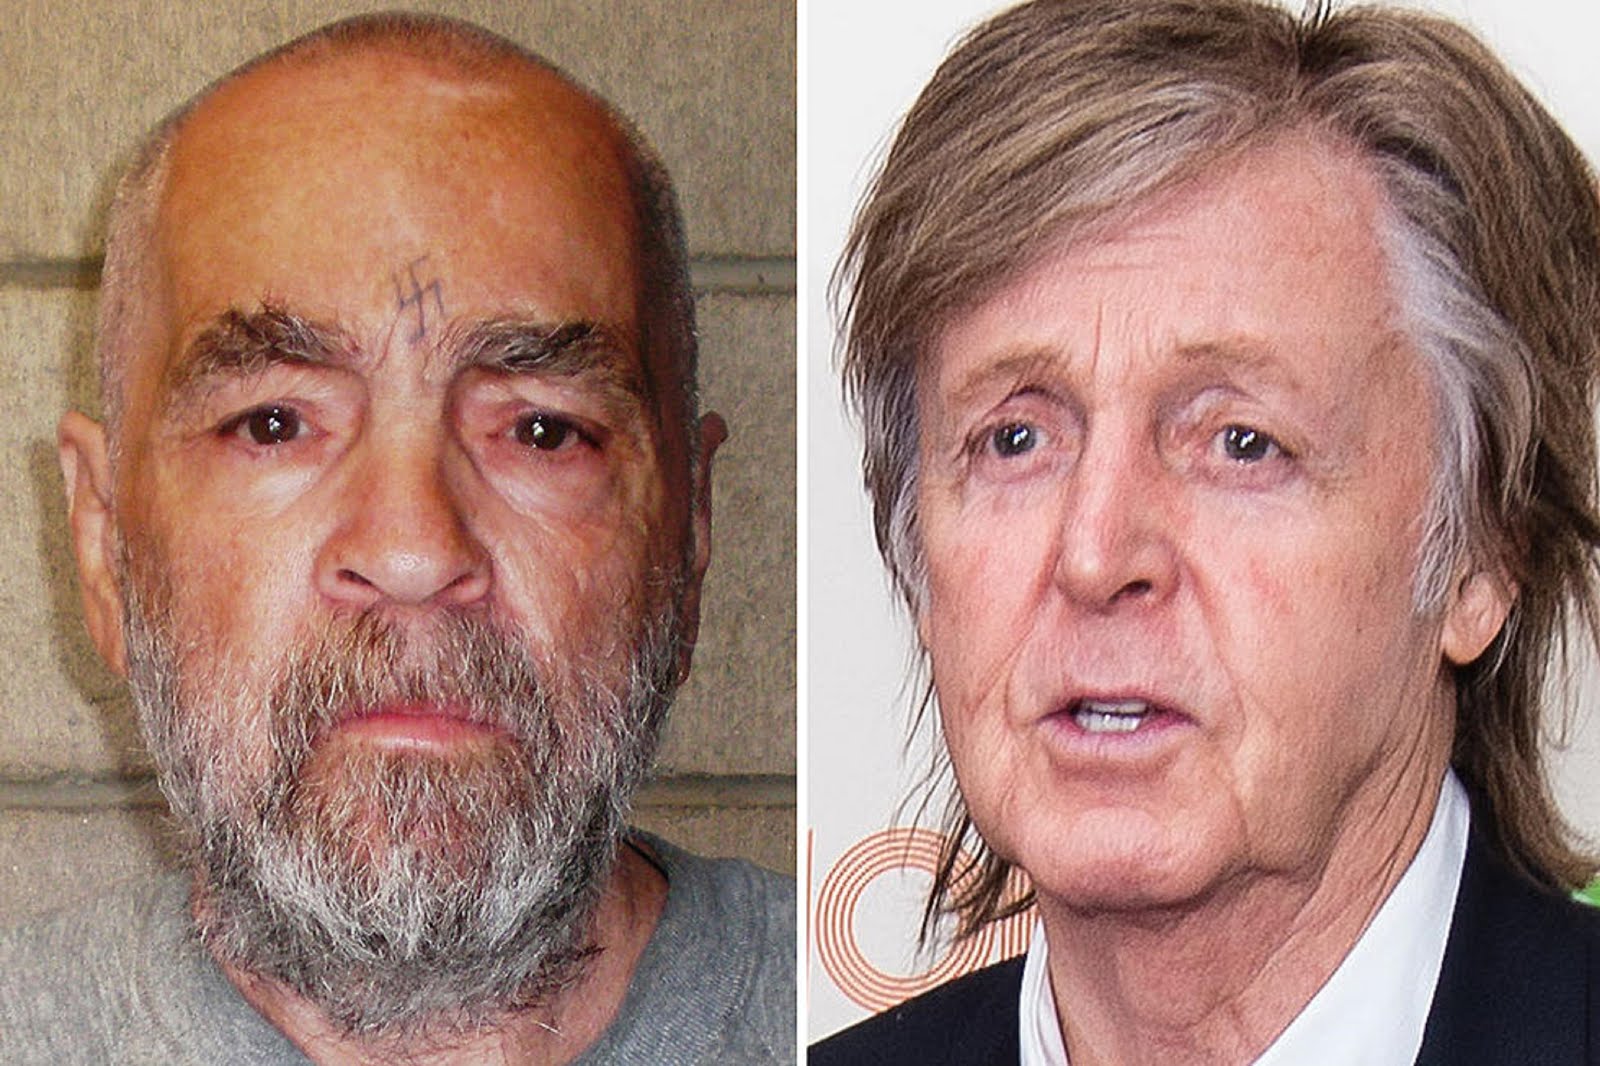 CHARLES MANSON THROWS PAUL McCARTNEY OFF OF HELTER SKELTER IN AN ATTEMPT TO BE THE 5th BEATLE